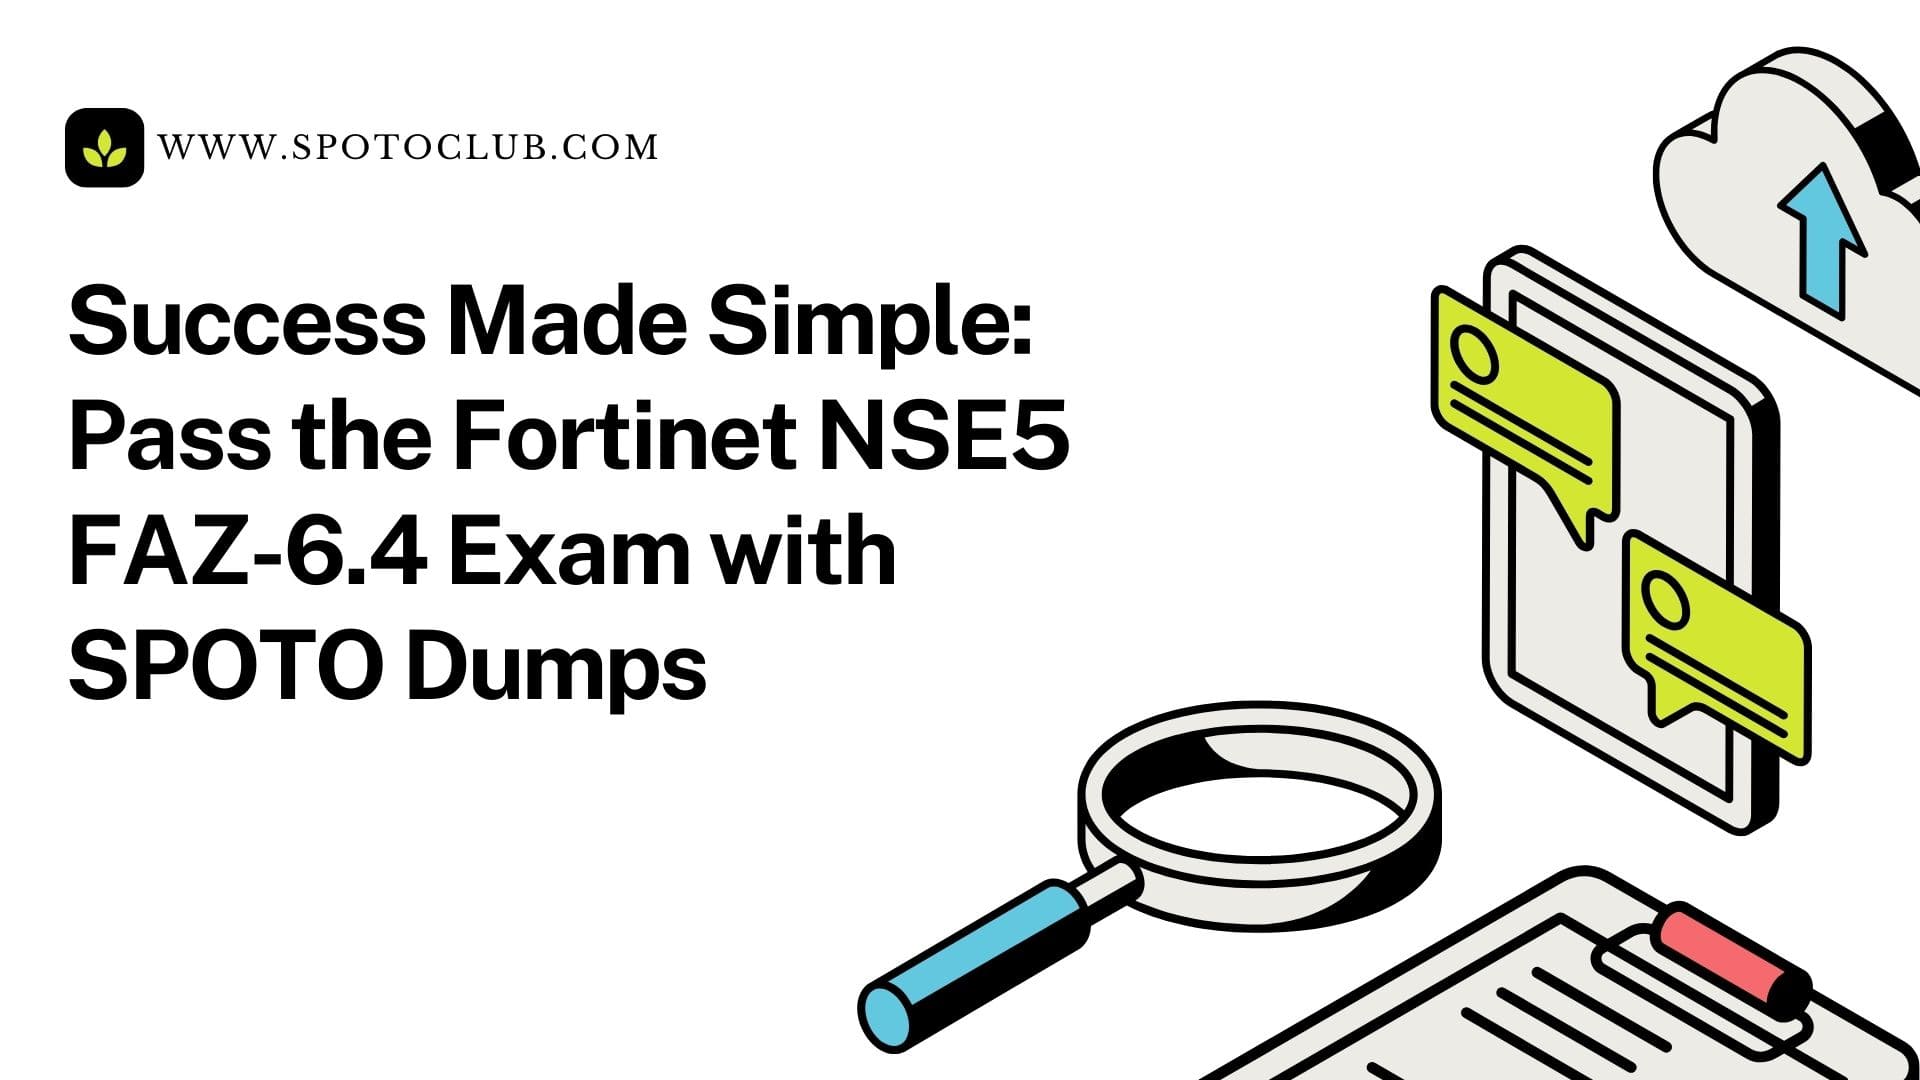 Fortinet NSE5 FAZ-6.4 Exam with SPOTO Dumps